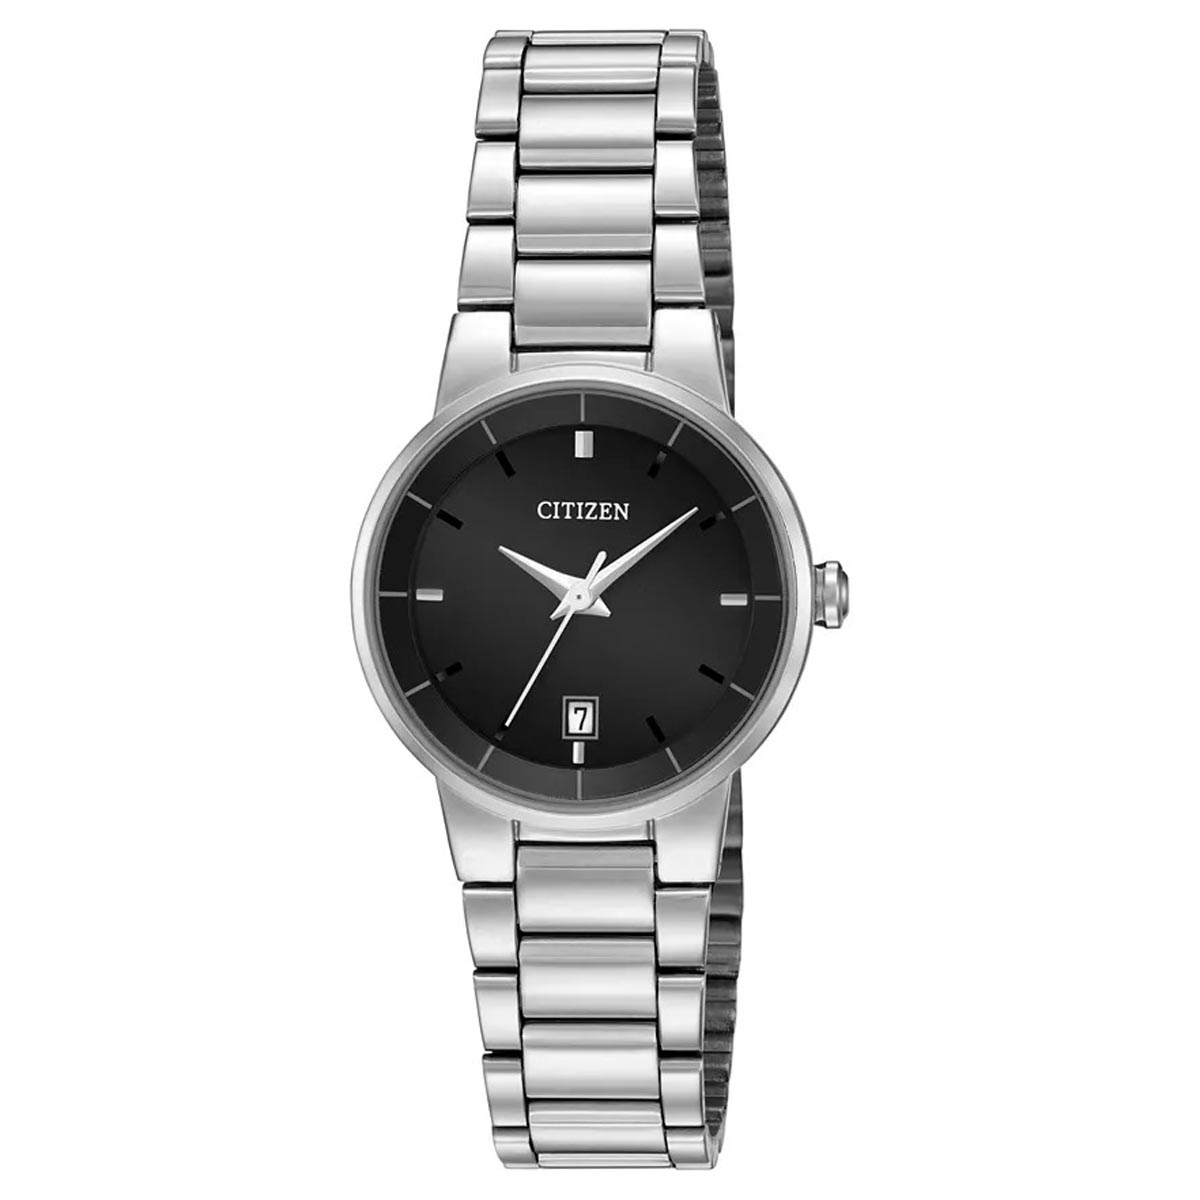 Citizen Ladies Watch With Black Dial and Stainless Steel Bracelet (quartz movement)